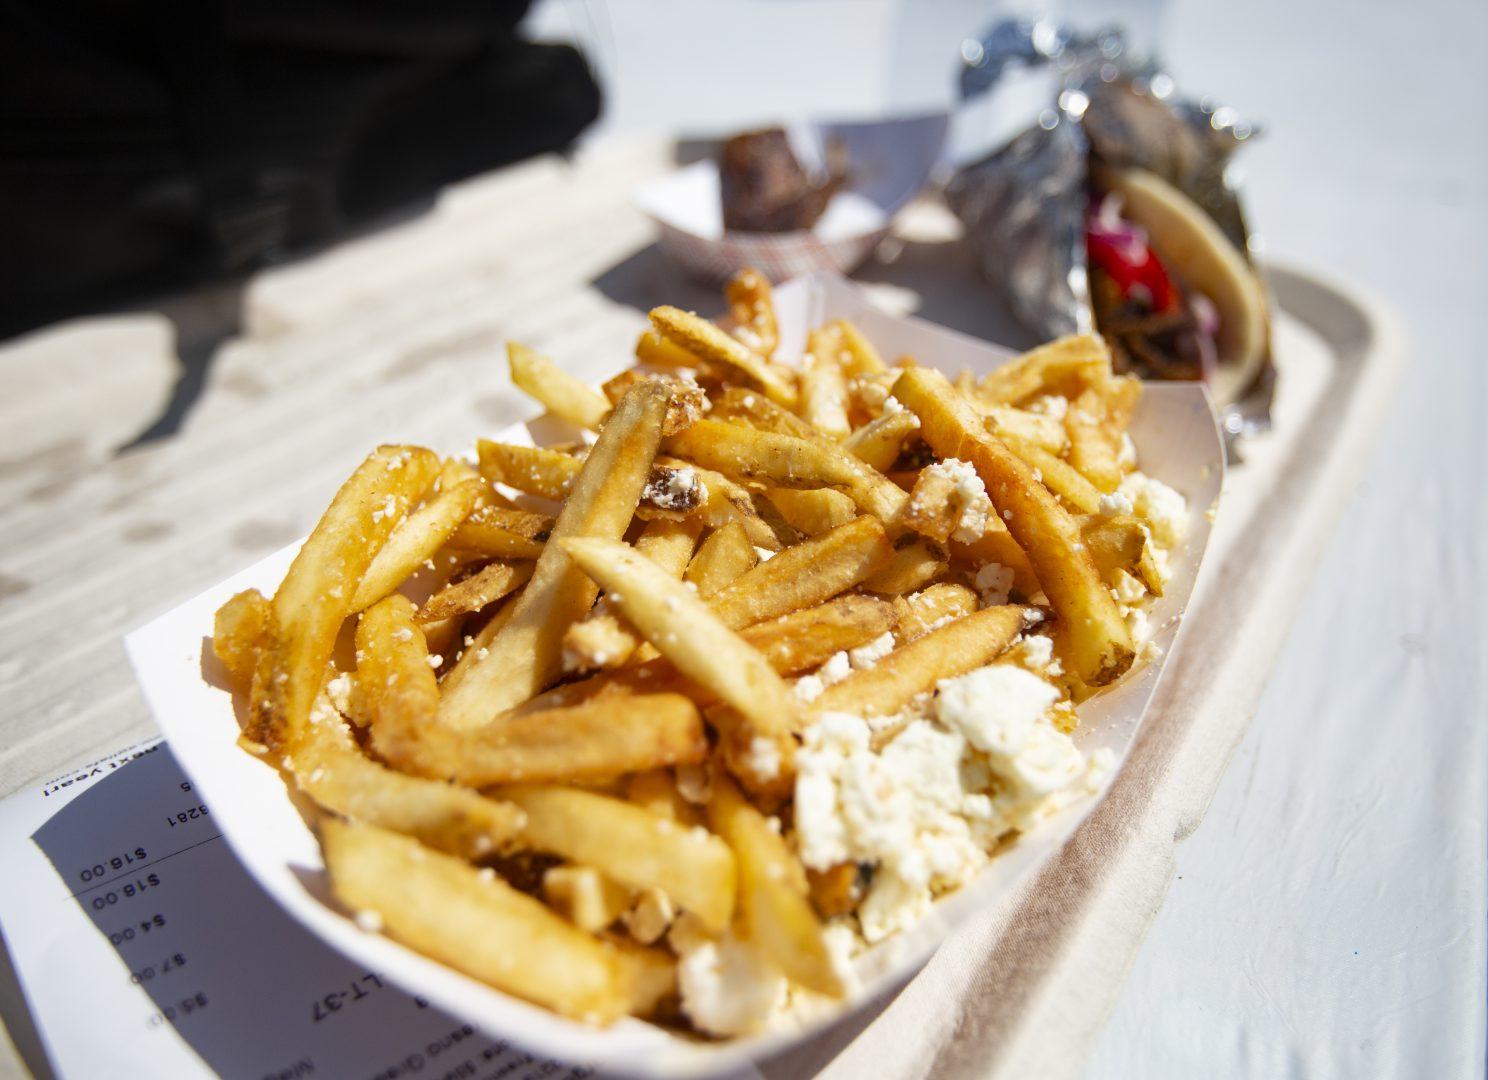 Feta+fries+was+one+of+the+Greek+food+items+guests+could+buy+during+the+59th+annual+Fresno+Greek+Fest+on+Saturday%2C+Aug.+24%2C+2019.++%28Larry+Valenzuela%2FThe+Collegian%29